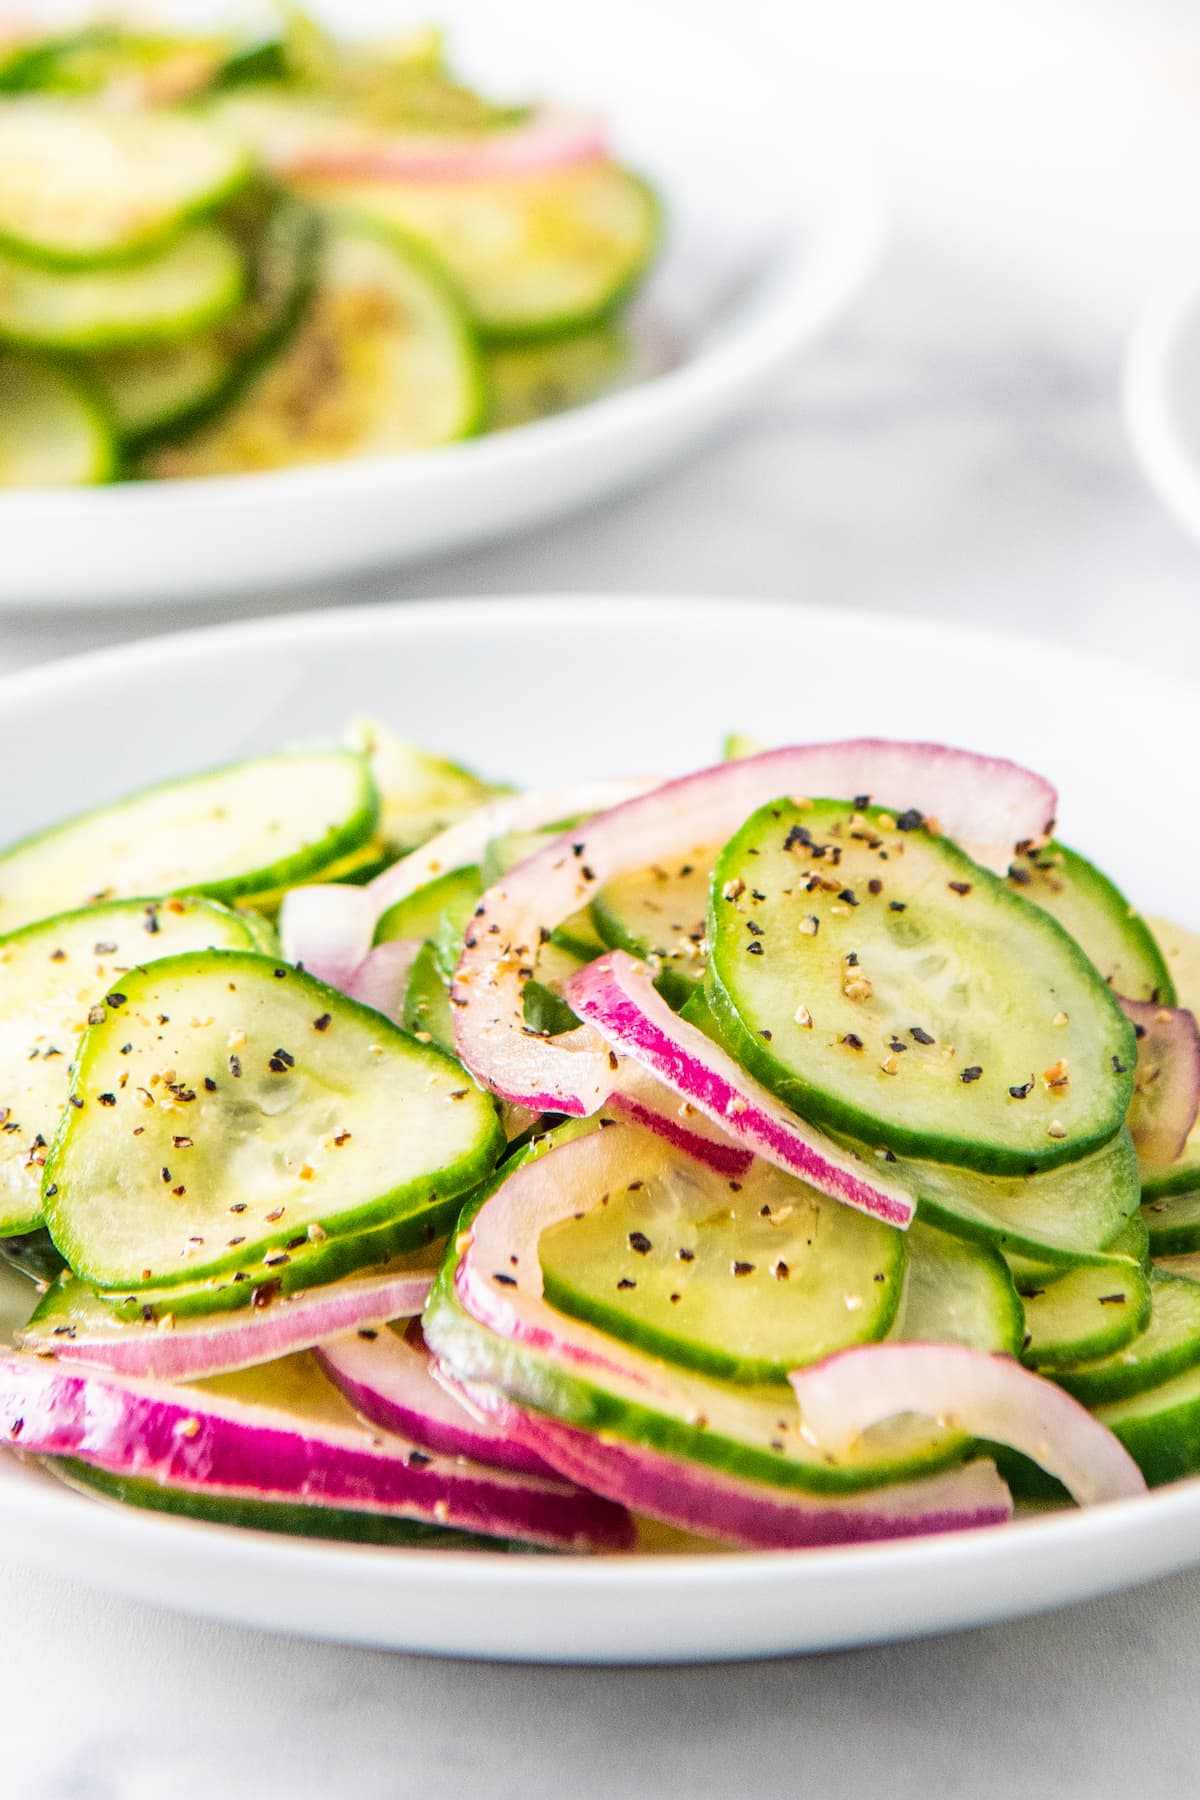 Sliced cucumbers and red onions tossed in a homemade vinaigrette on a white plate.